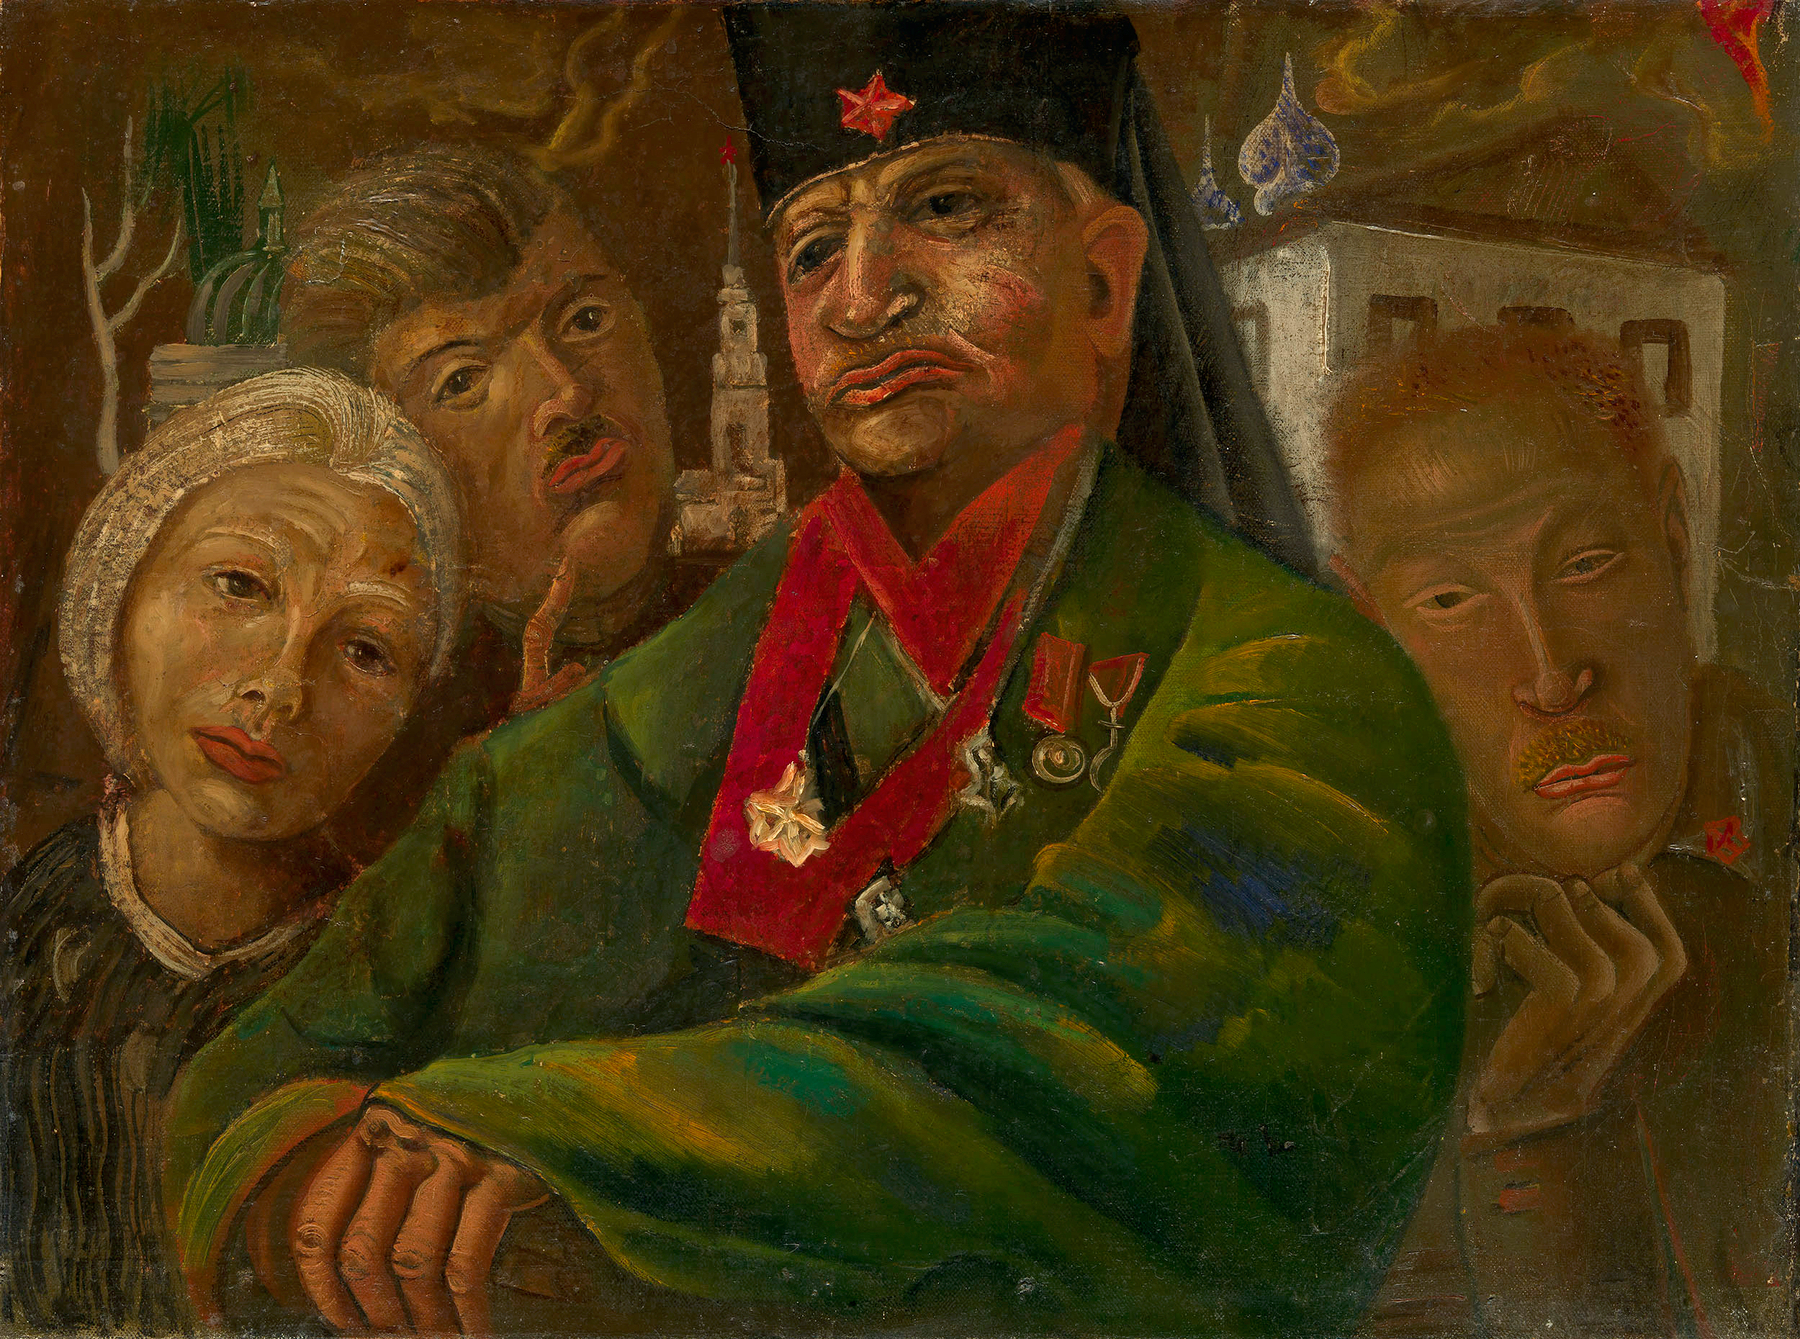 Red Army General